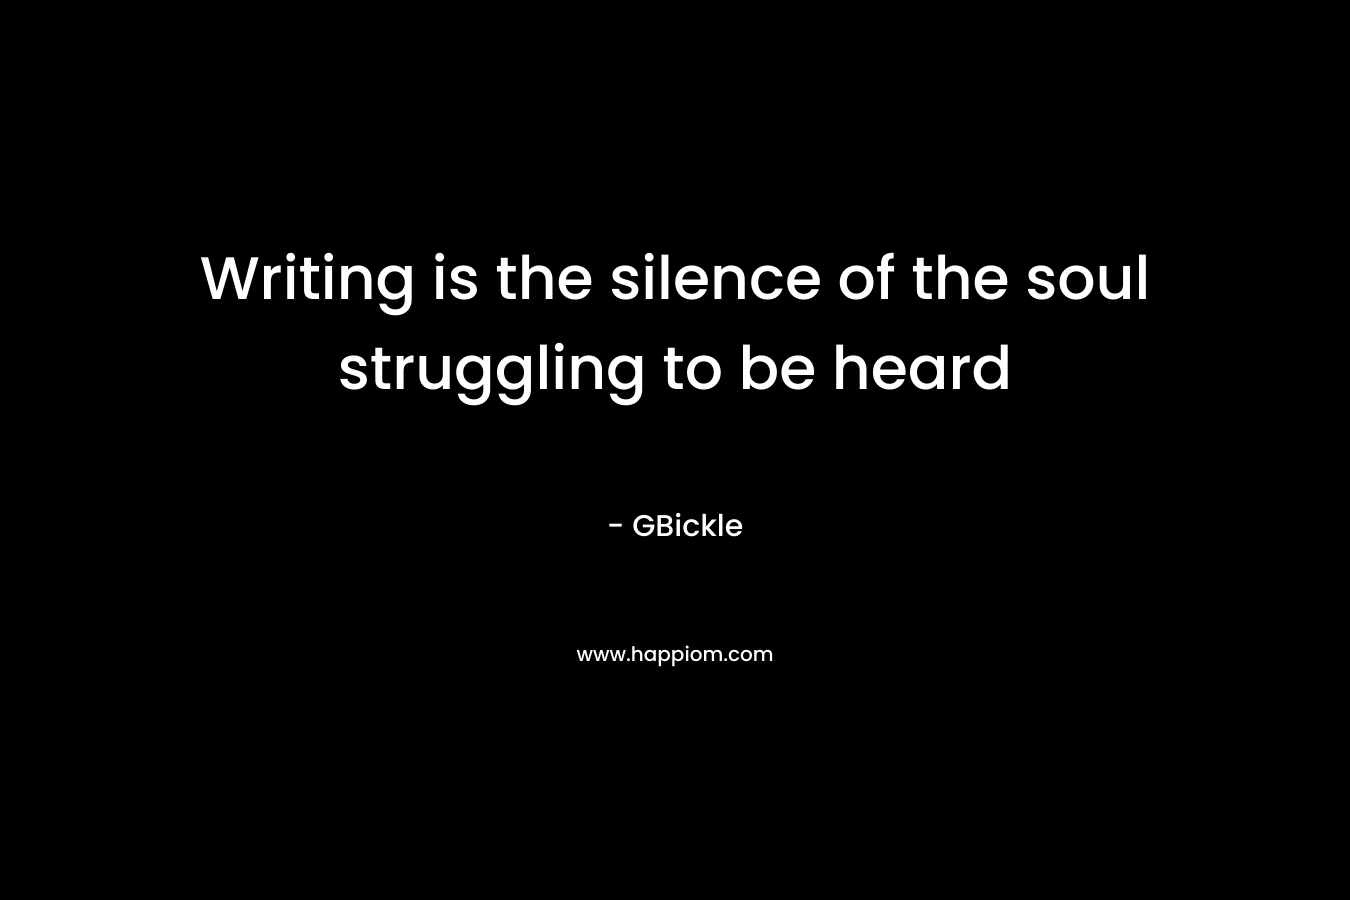 Writing is the silence of the soul struggling to be heard